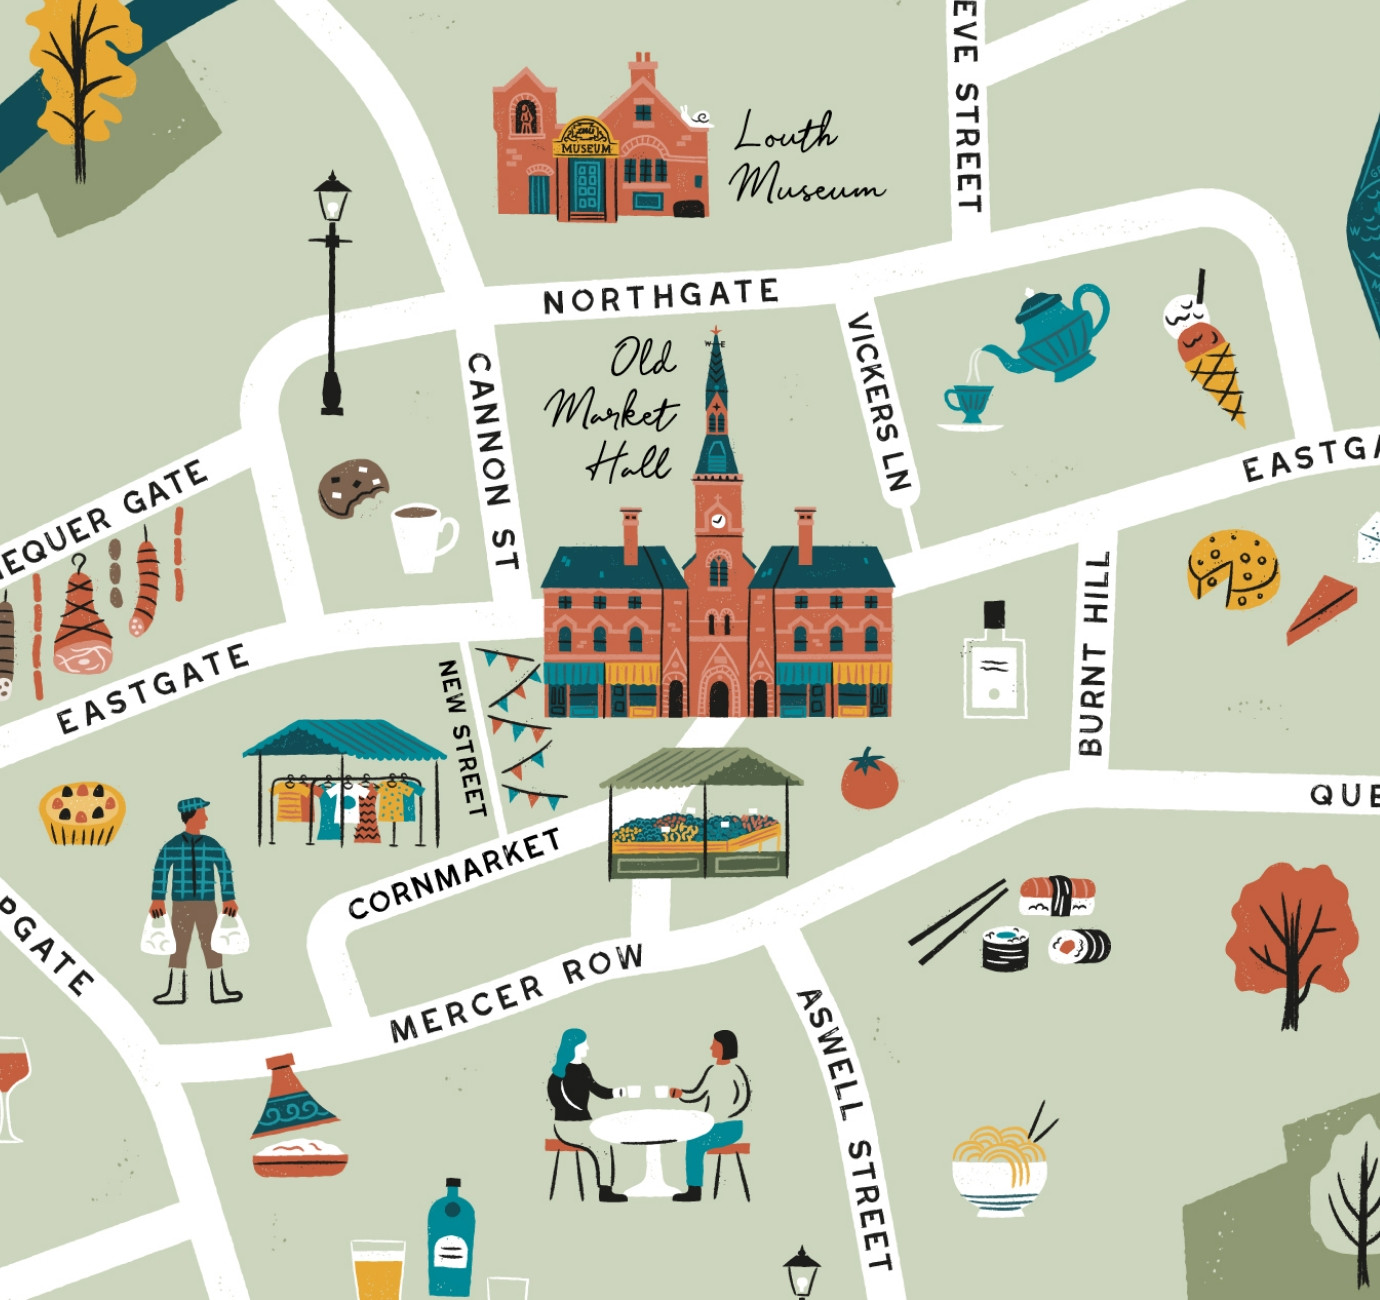 Food trail illustrated map by Root Studio